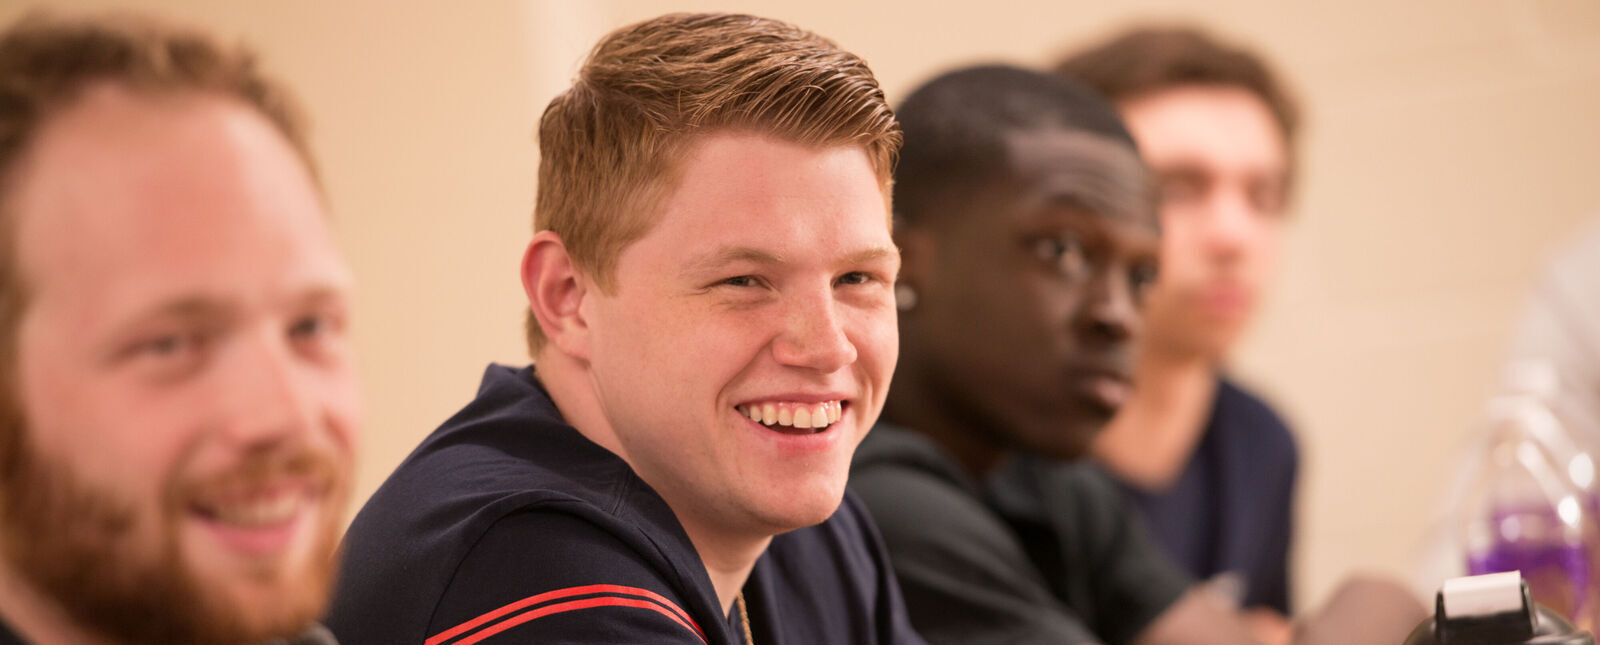 A male student smiles while listening in a class